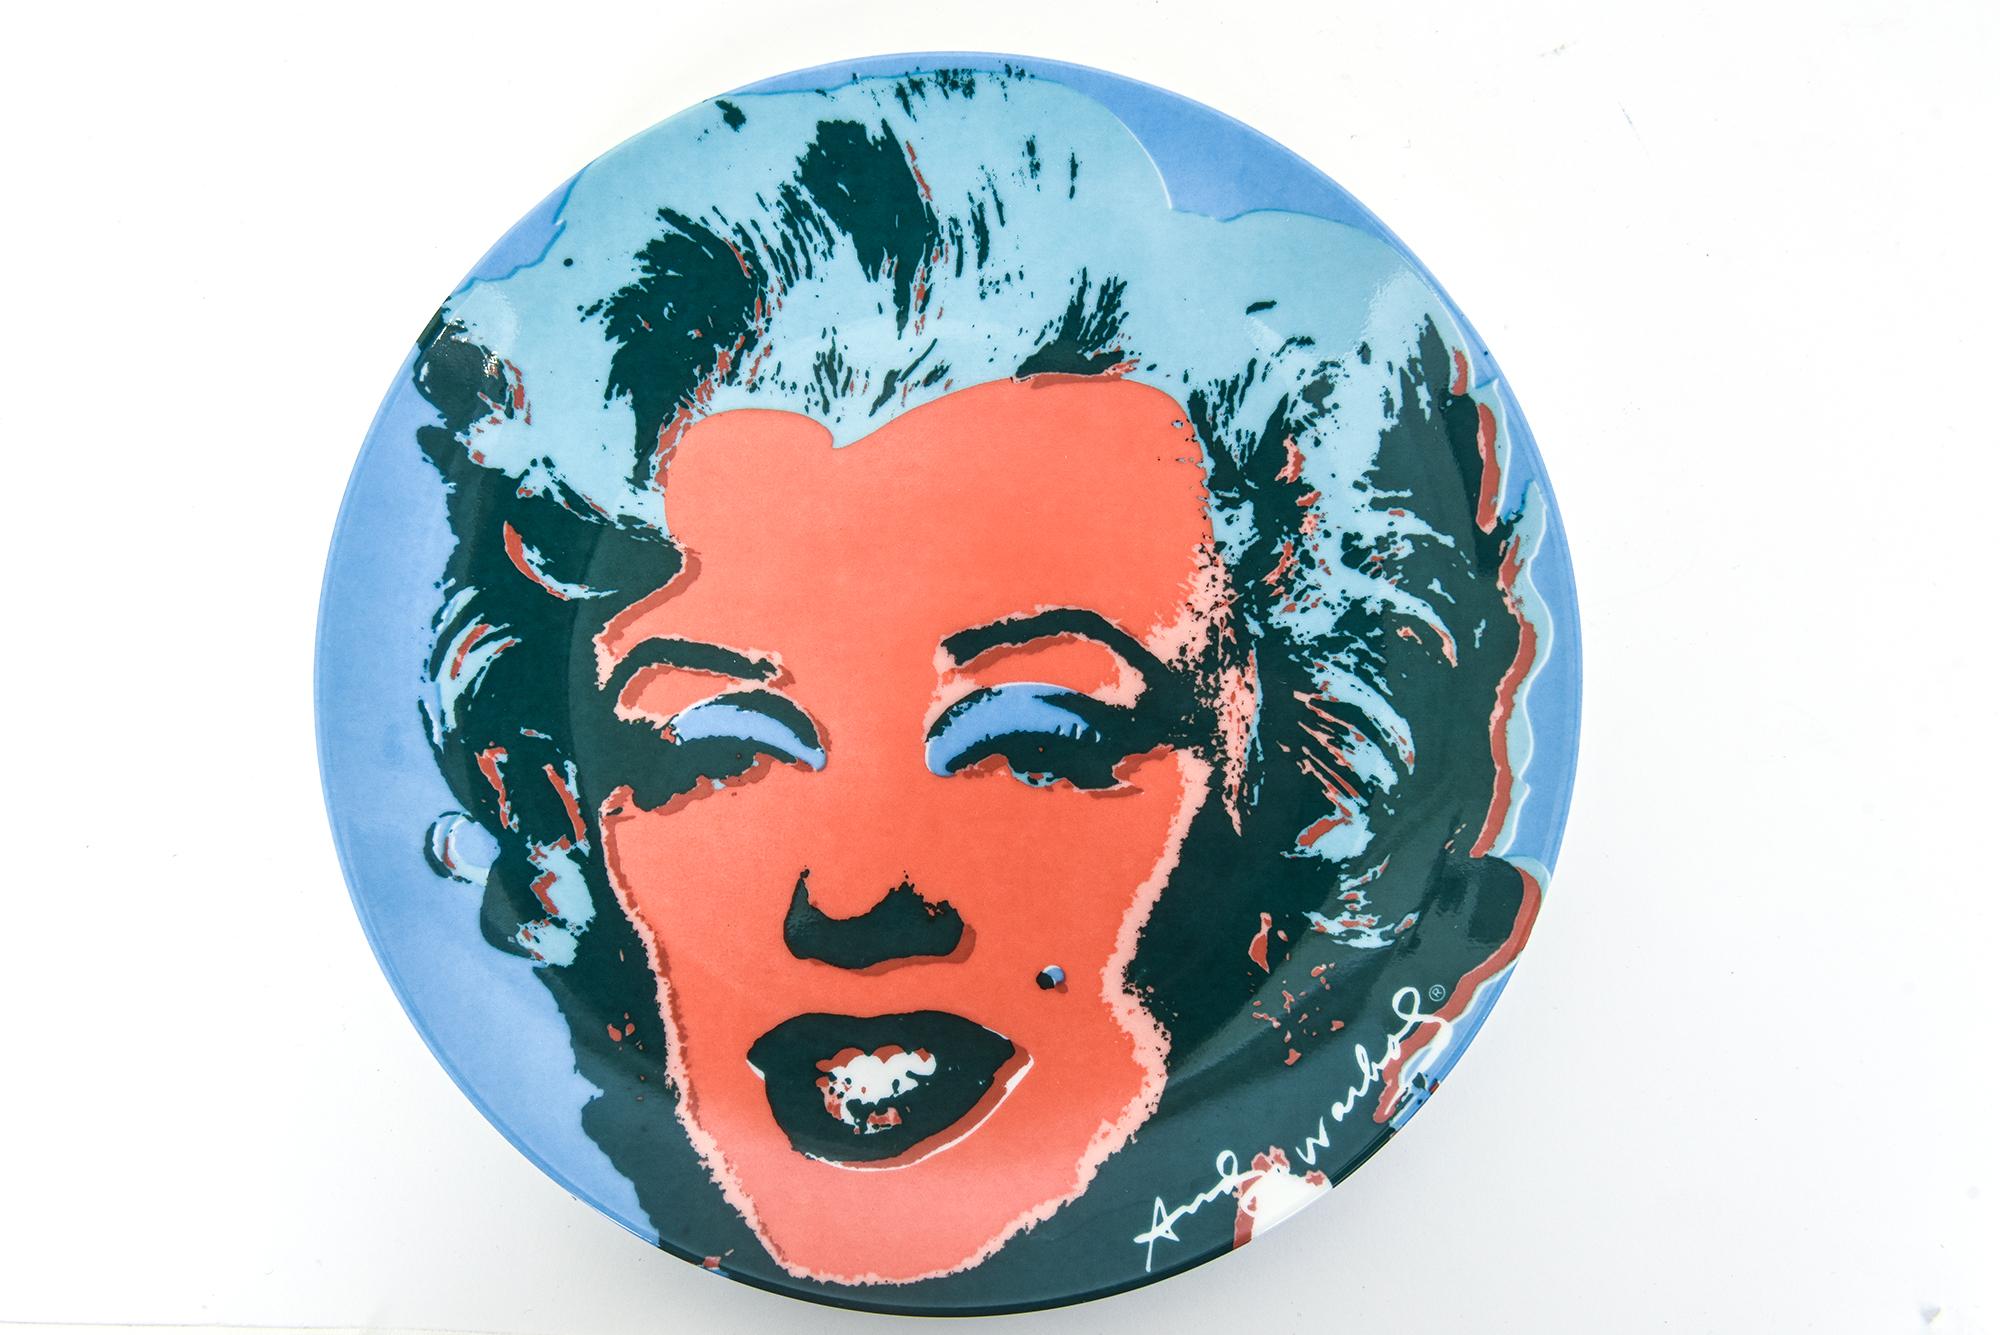 American Set of Four Andy Warhol Marilyn Monroe Bone China Plates By Block For Sale